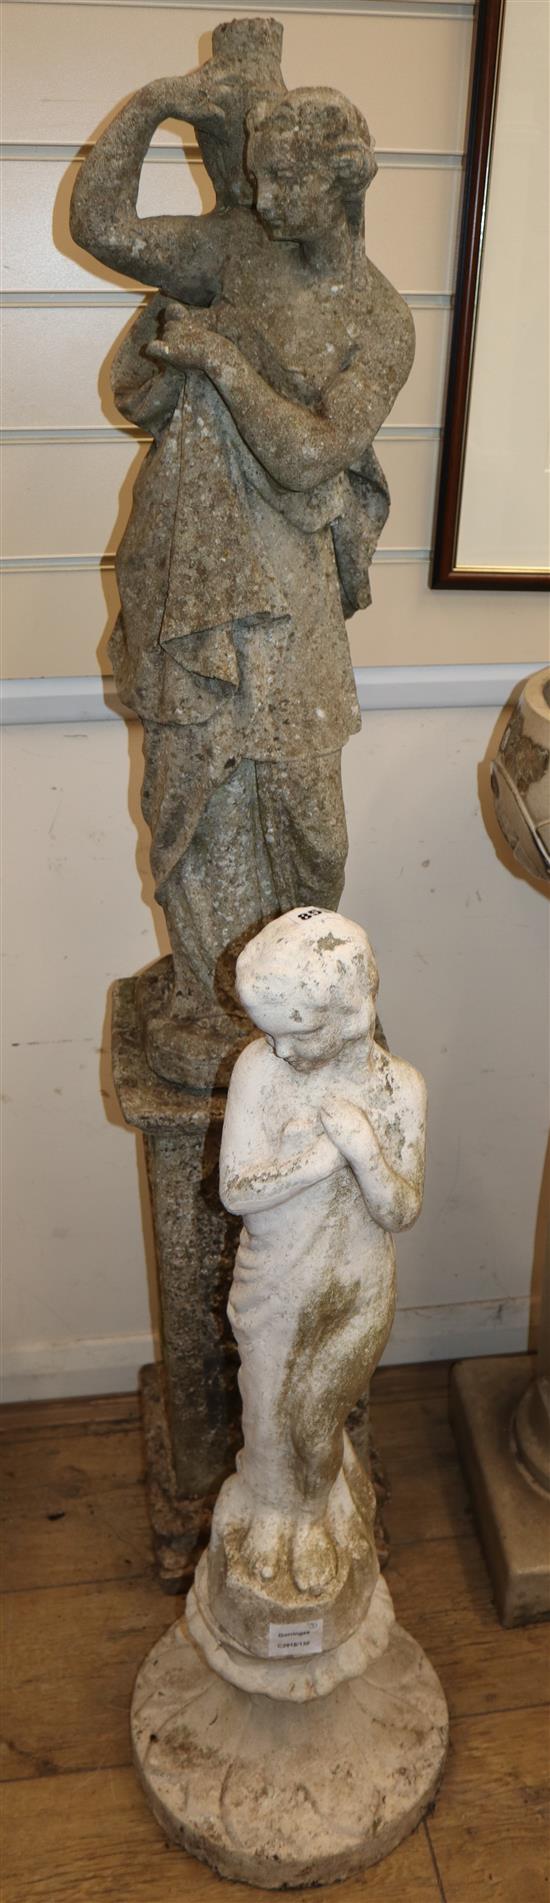 Two reconstituted stone garden ornaments Larger 128cm high